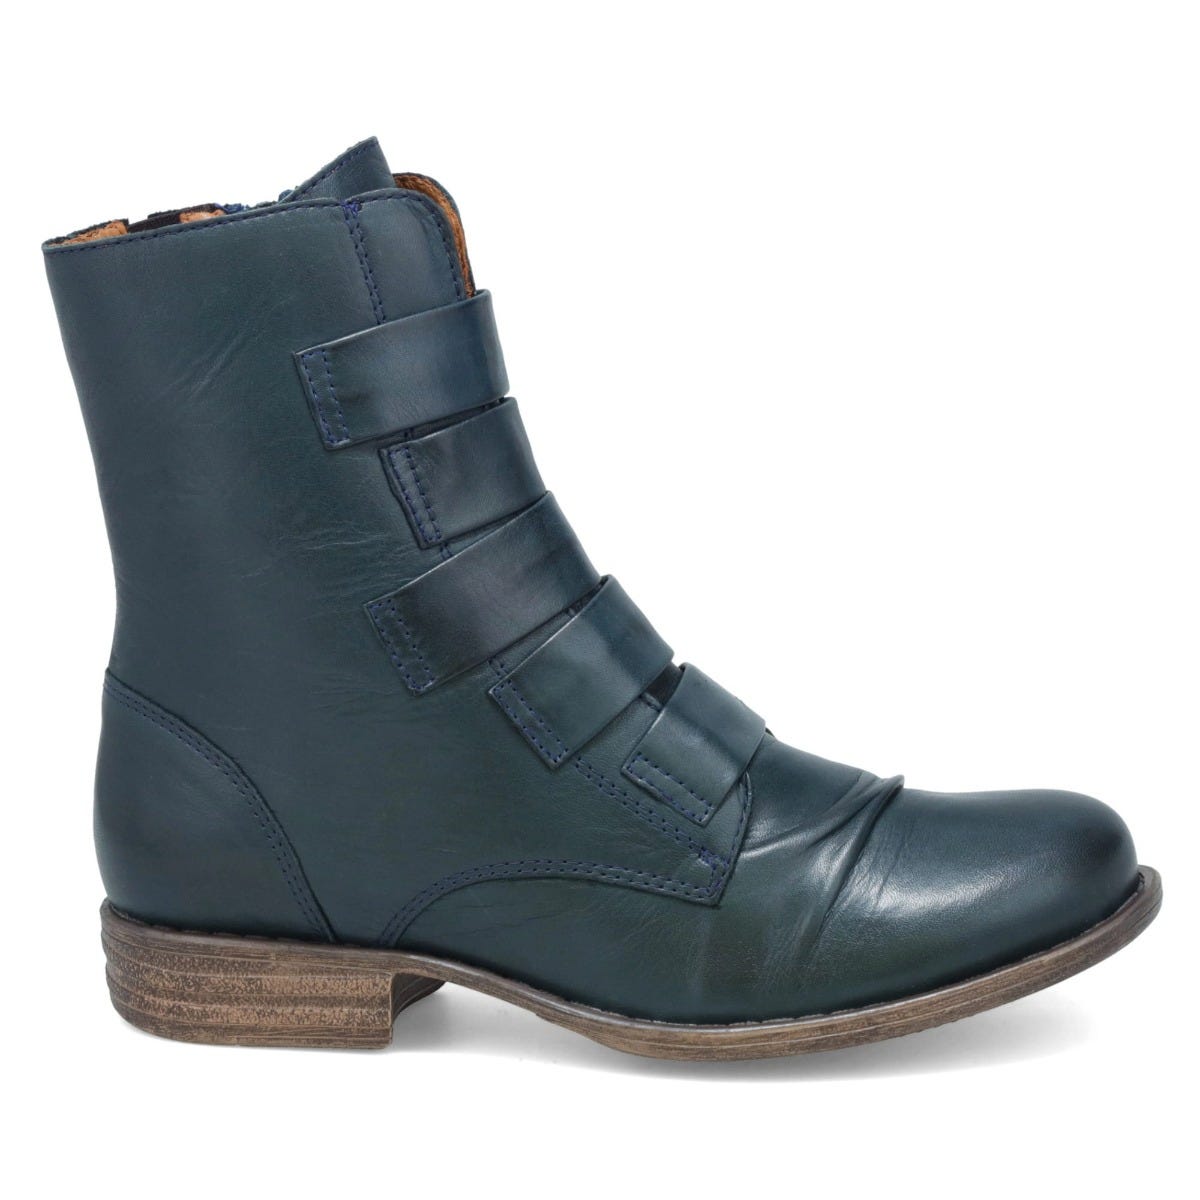 Outer view of the miz mooz leighton boot. This boot is ocean (dark blue) colored. It is slightly taller than ankle height and has decorative straps all along the front.